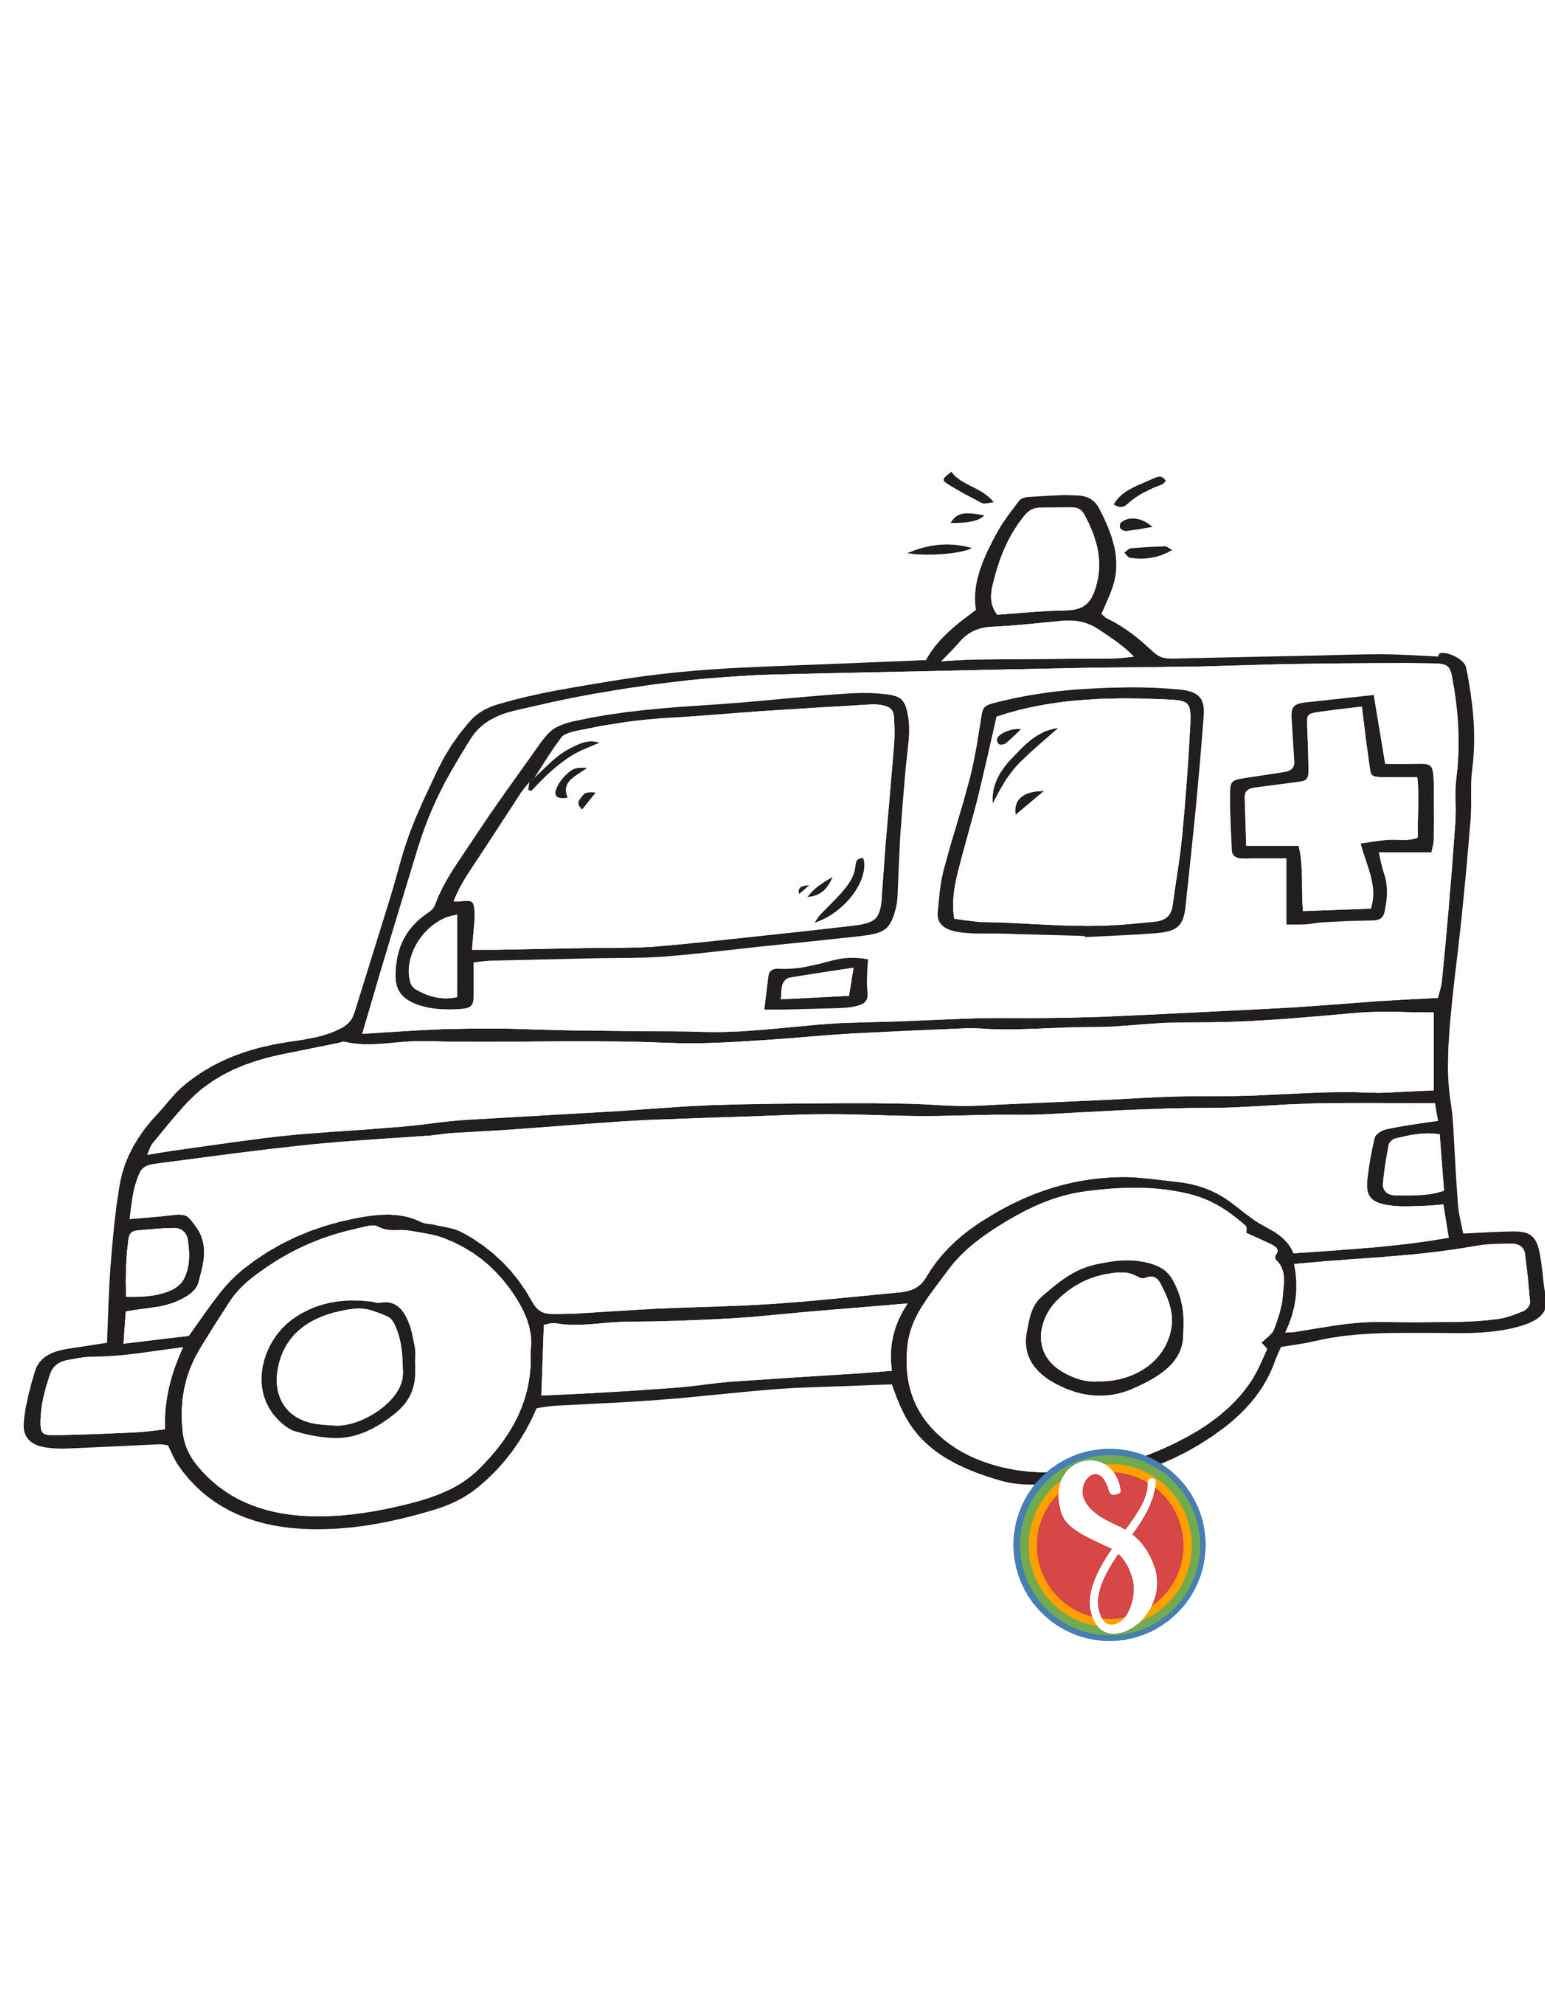 simple drawing of an ambulance to color